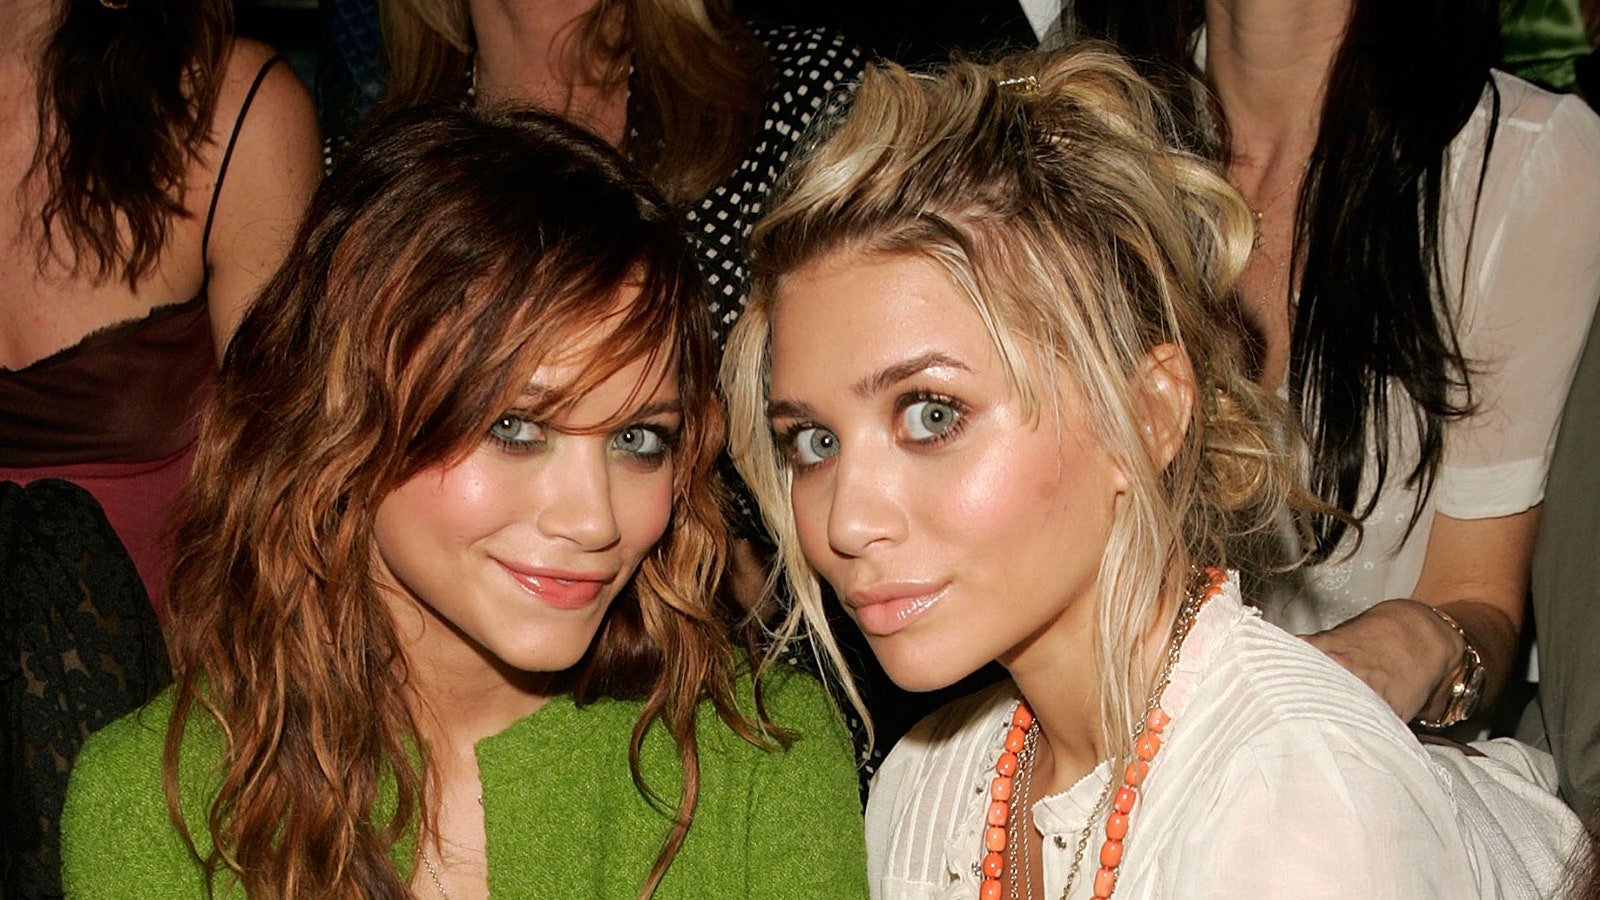 Of Mary Kate And Ashley Olsen's Very Best Style Moments